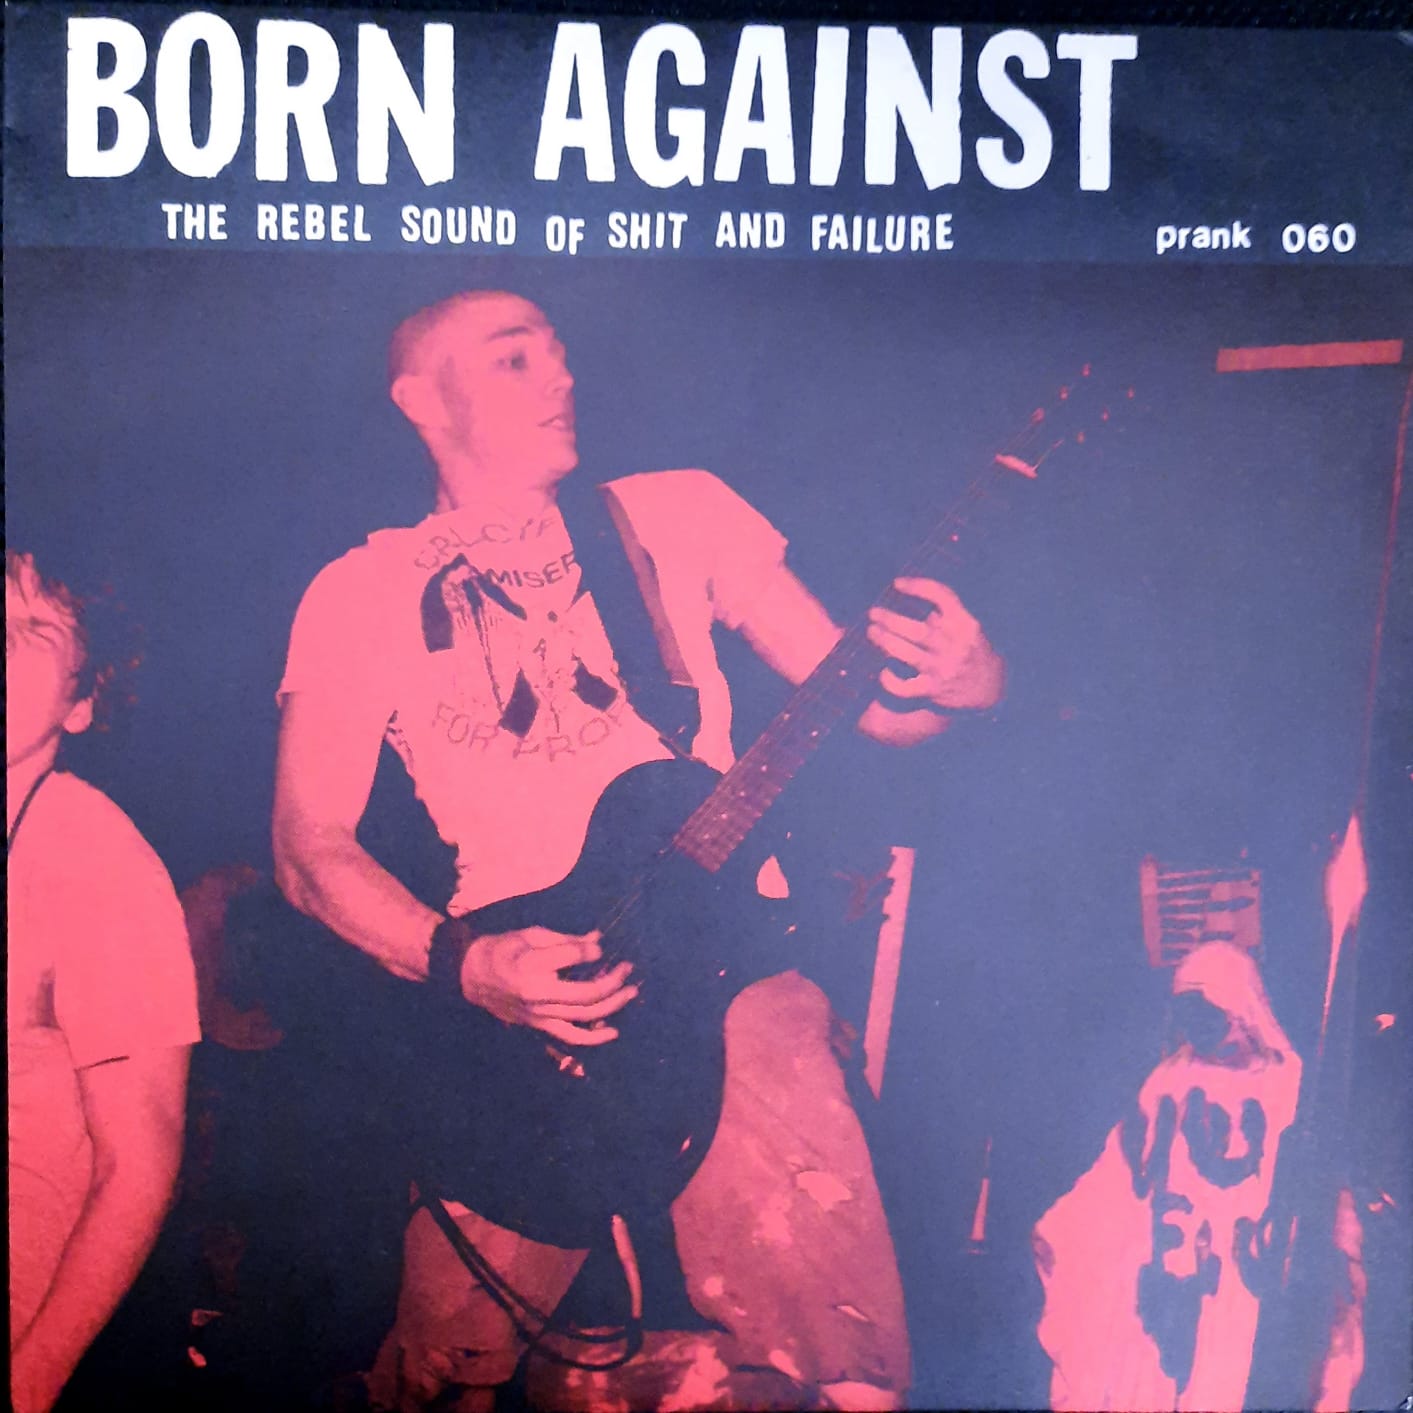 Born Against – The Rebel Sound Of Shit And Failure (LP, EE.UU., 2003)